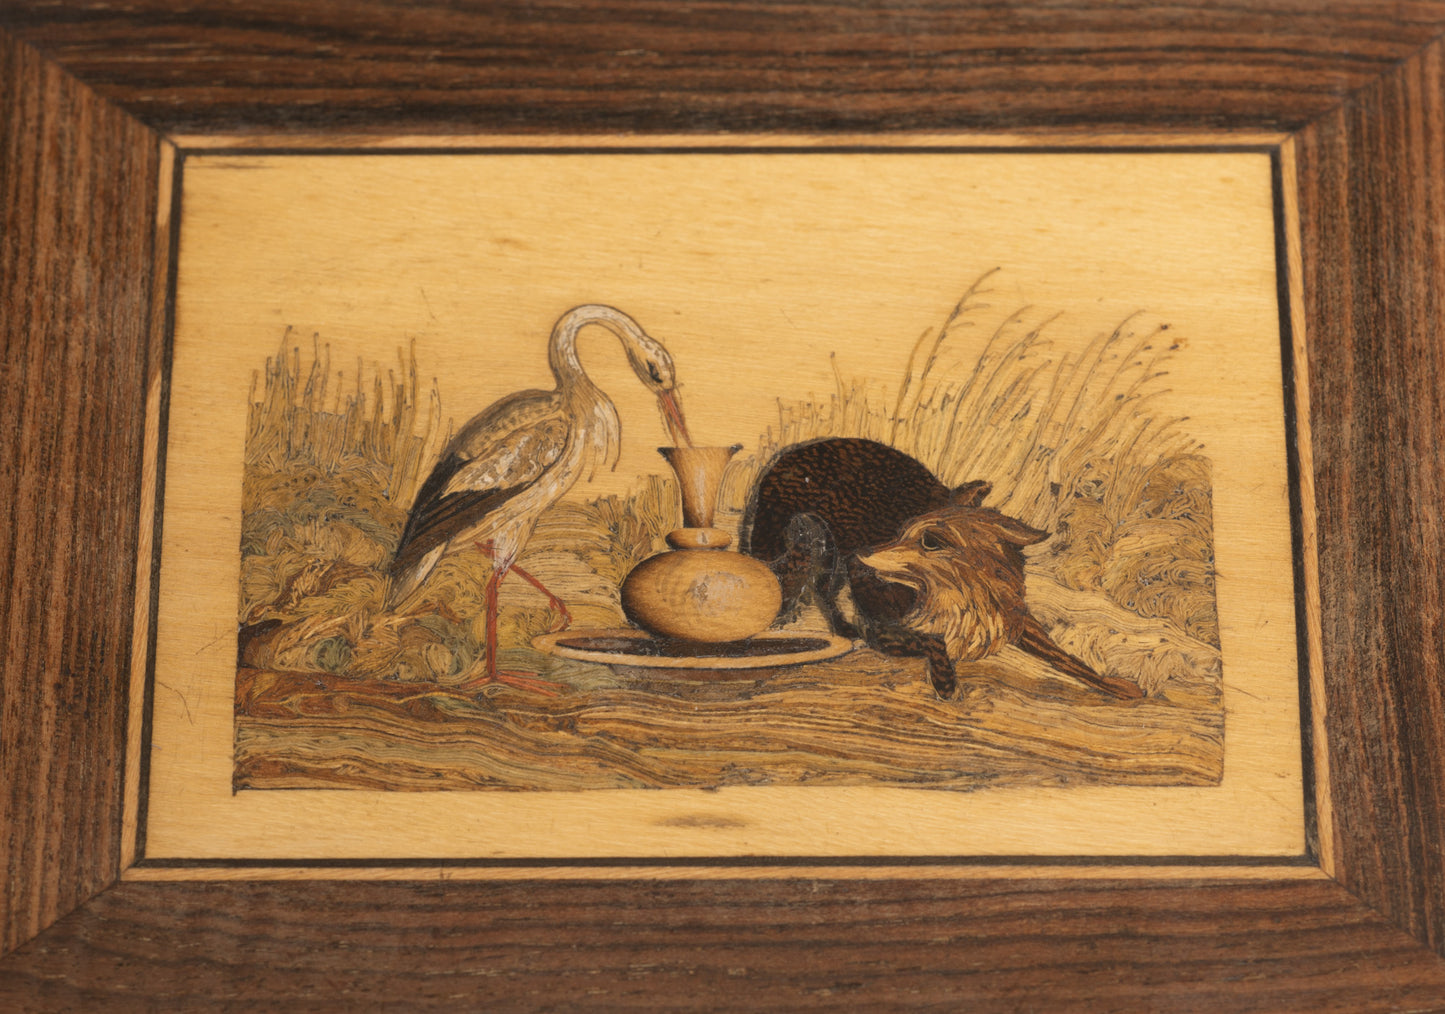 Superb Antique Carved Wood & Marquetry Desk Weight/Paperweight Fox & Stork c1840 (Code 2658)